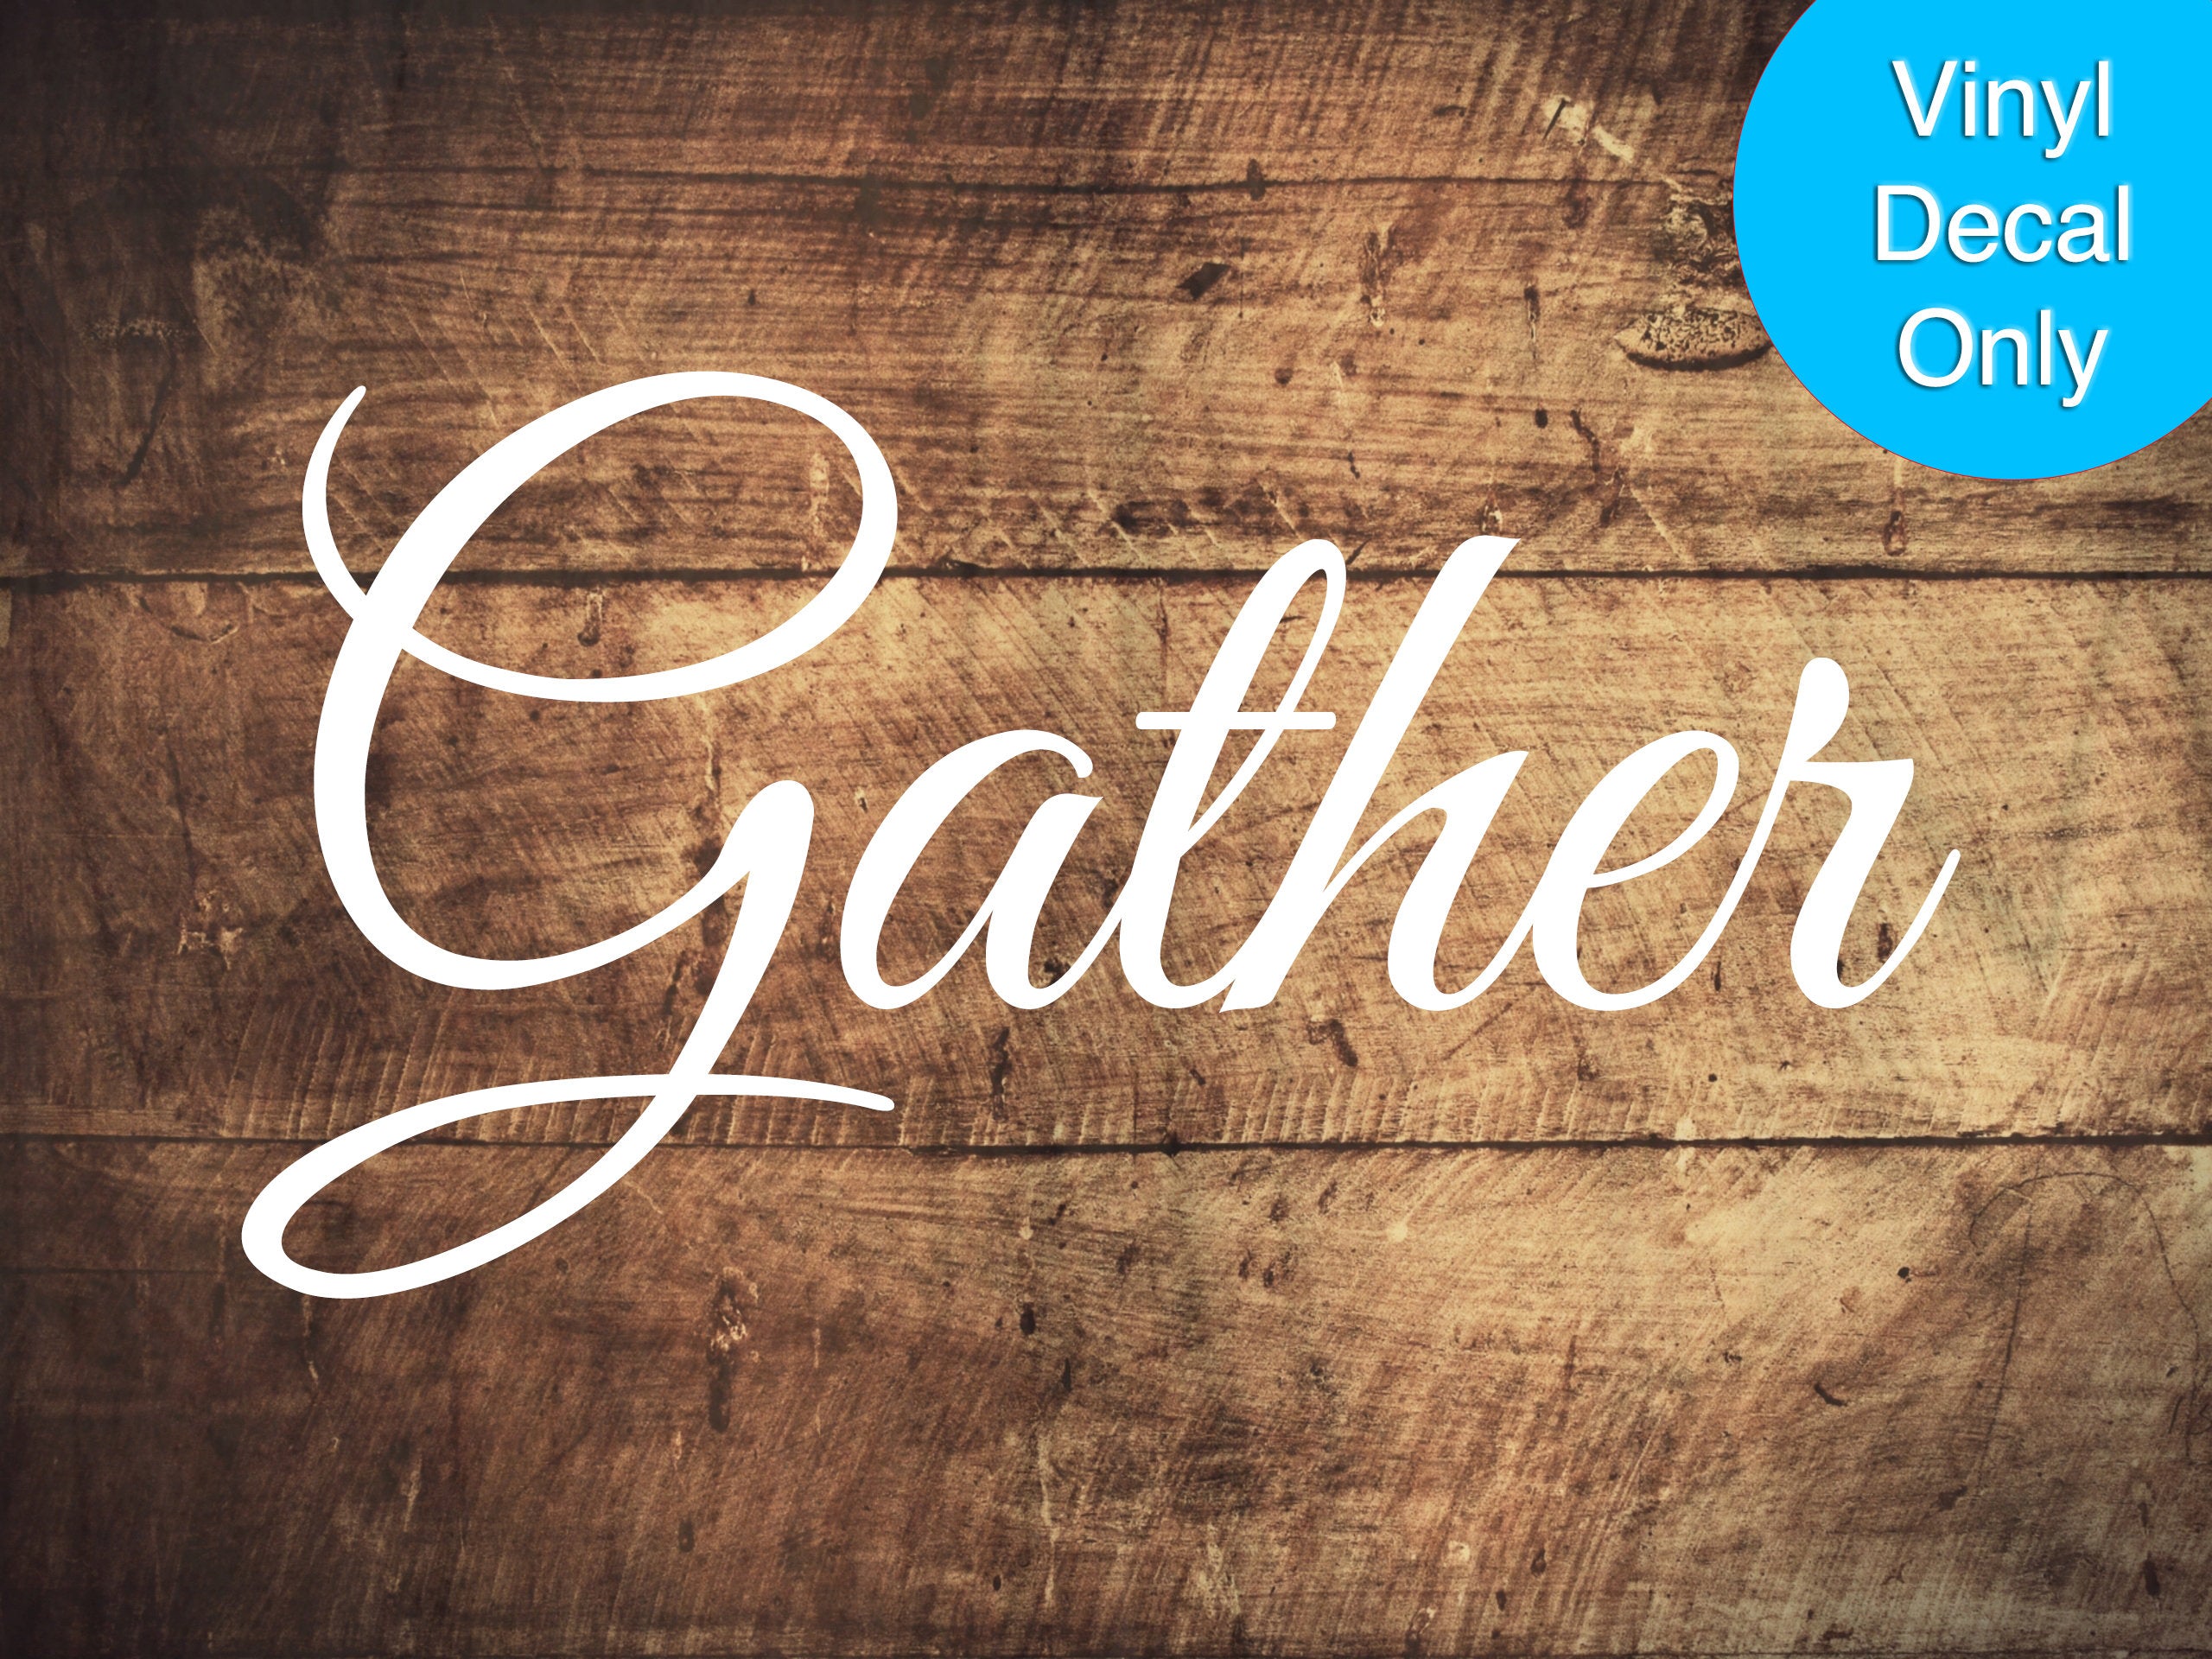 Gather - Fall, Thanksgiving, Seasonal, Permanent Outdoor-Grade Vinyl Decal for Signs, Weatherproof and Water-proof